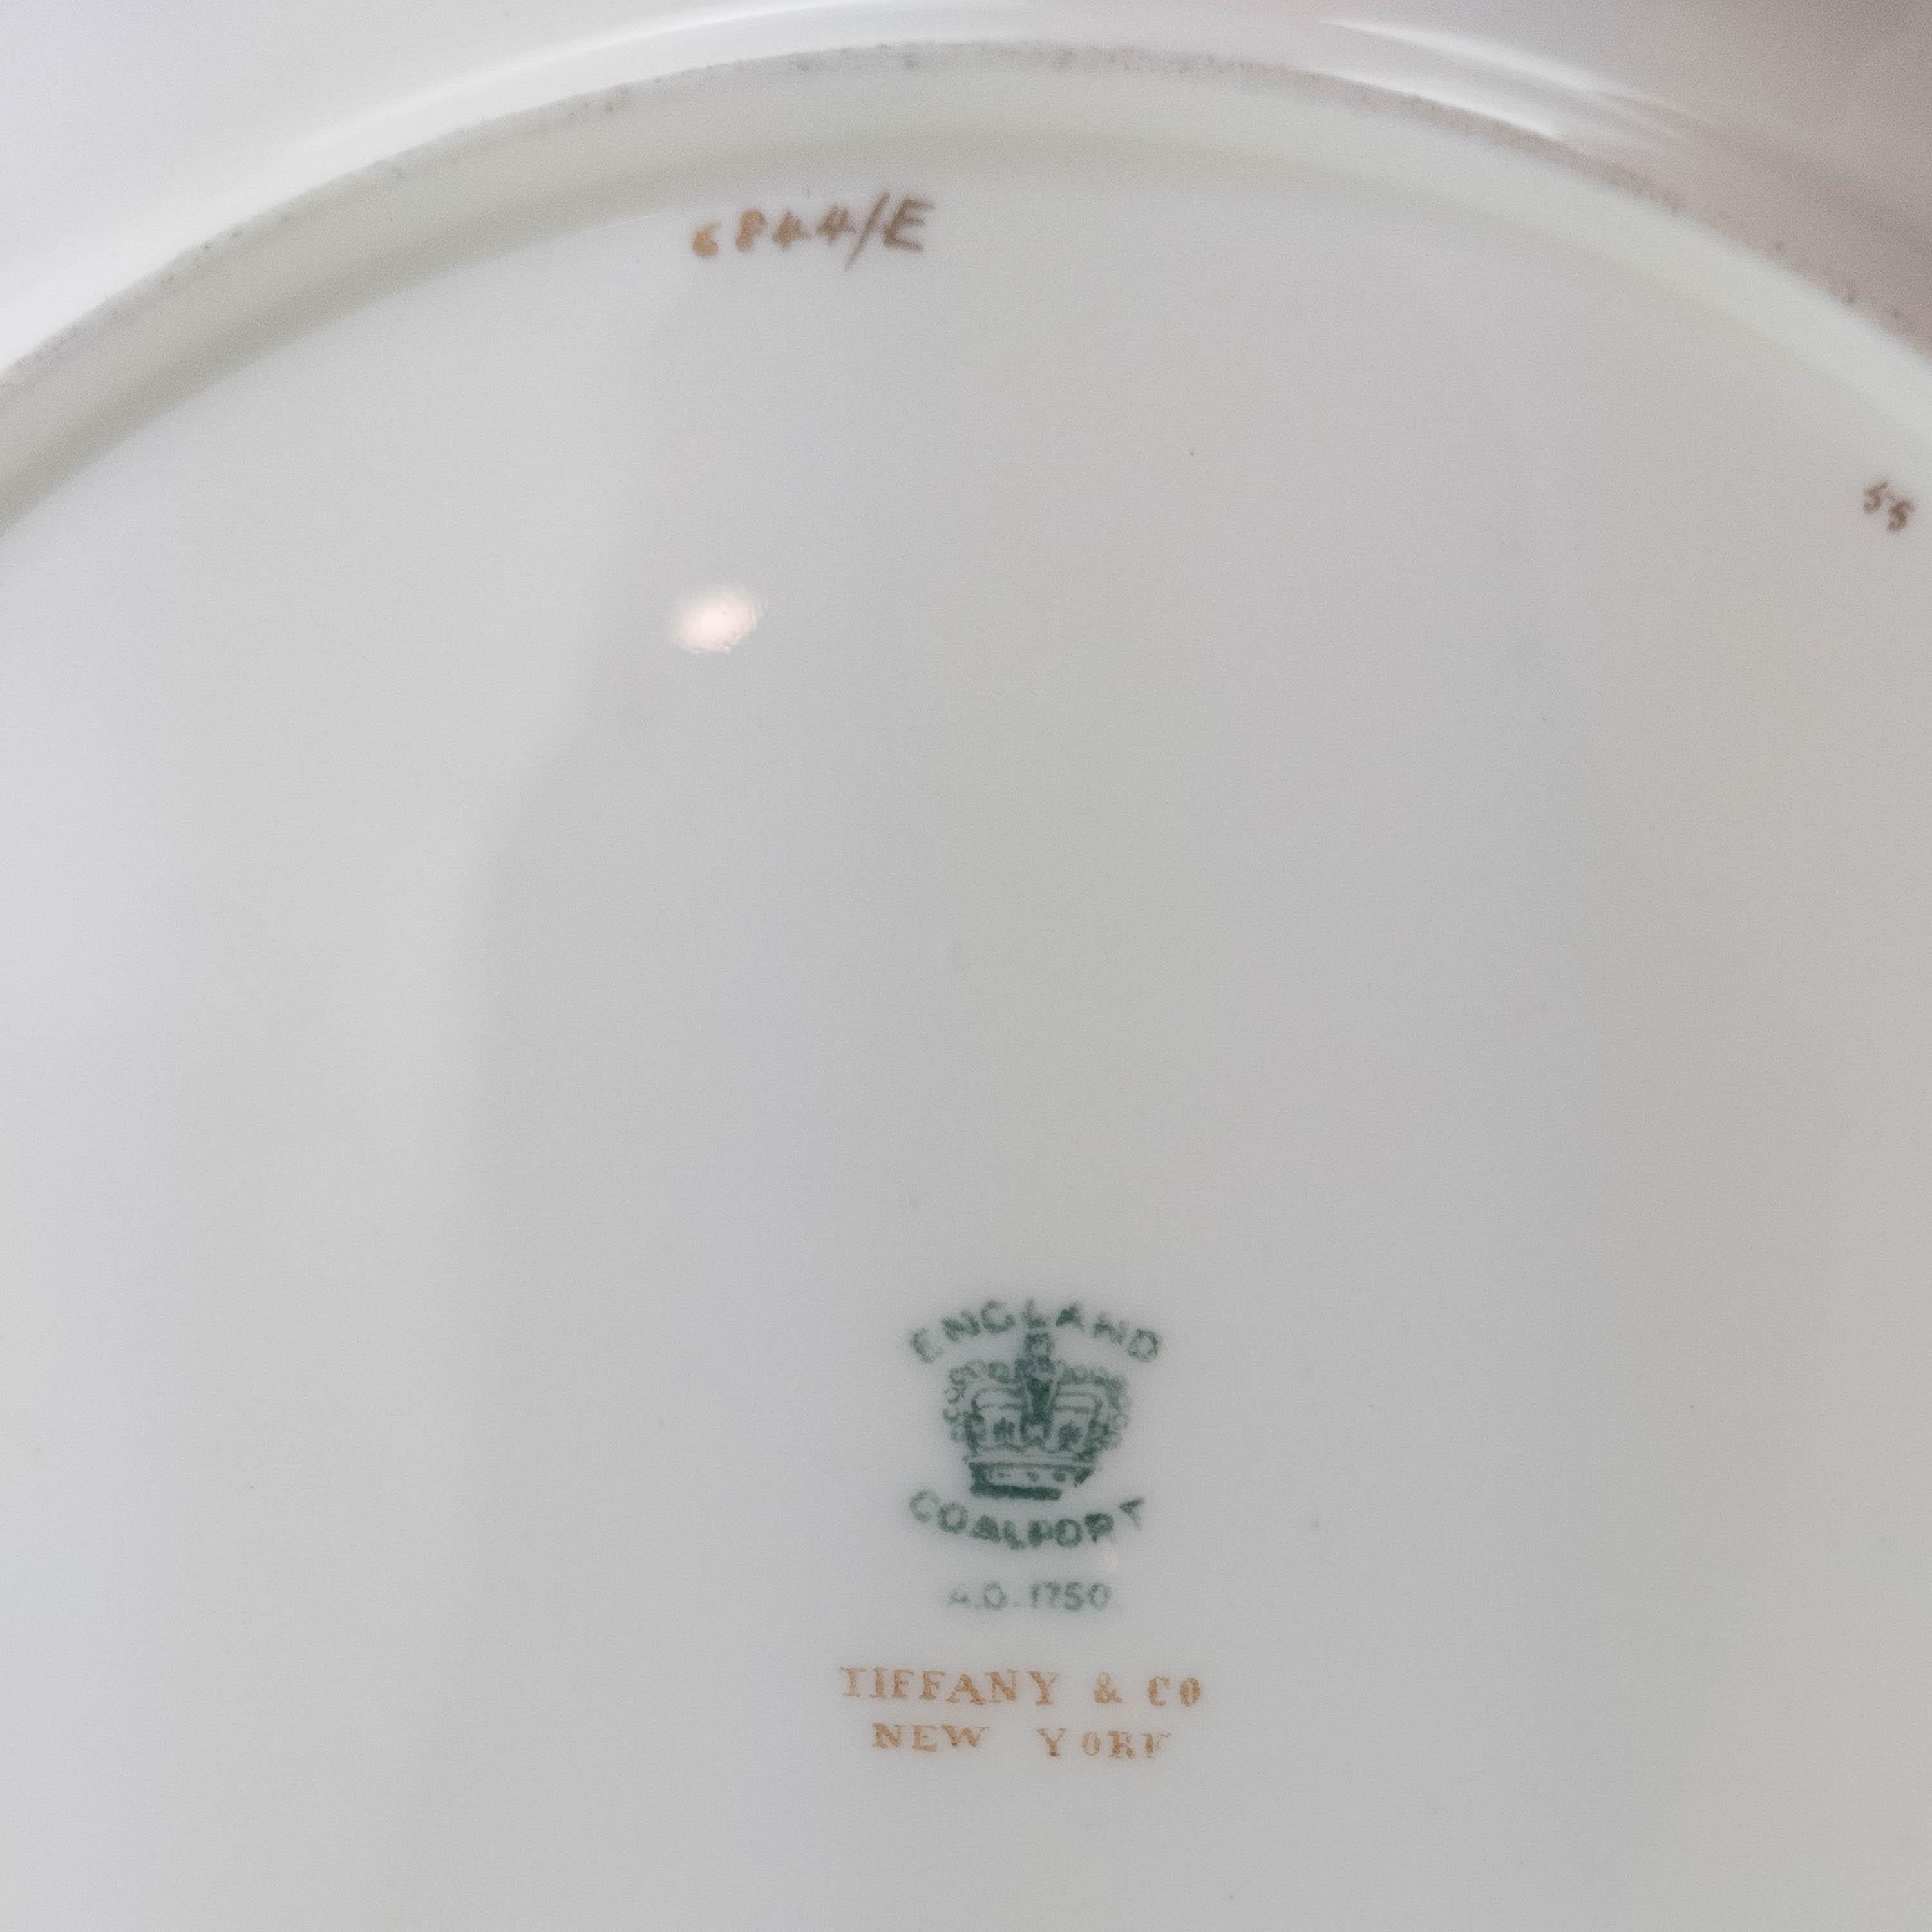 From the storied firm of Minton, one of their timeless and classic designs. This plate features a white and soft cream combination ground with a 24-karat gold encrusted outer band. One of the most versatile patterns and will mix and match in nicely